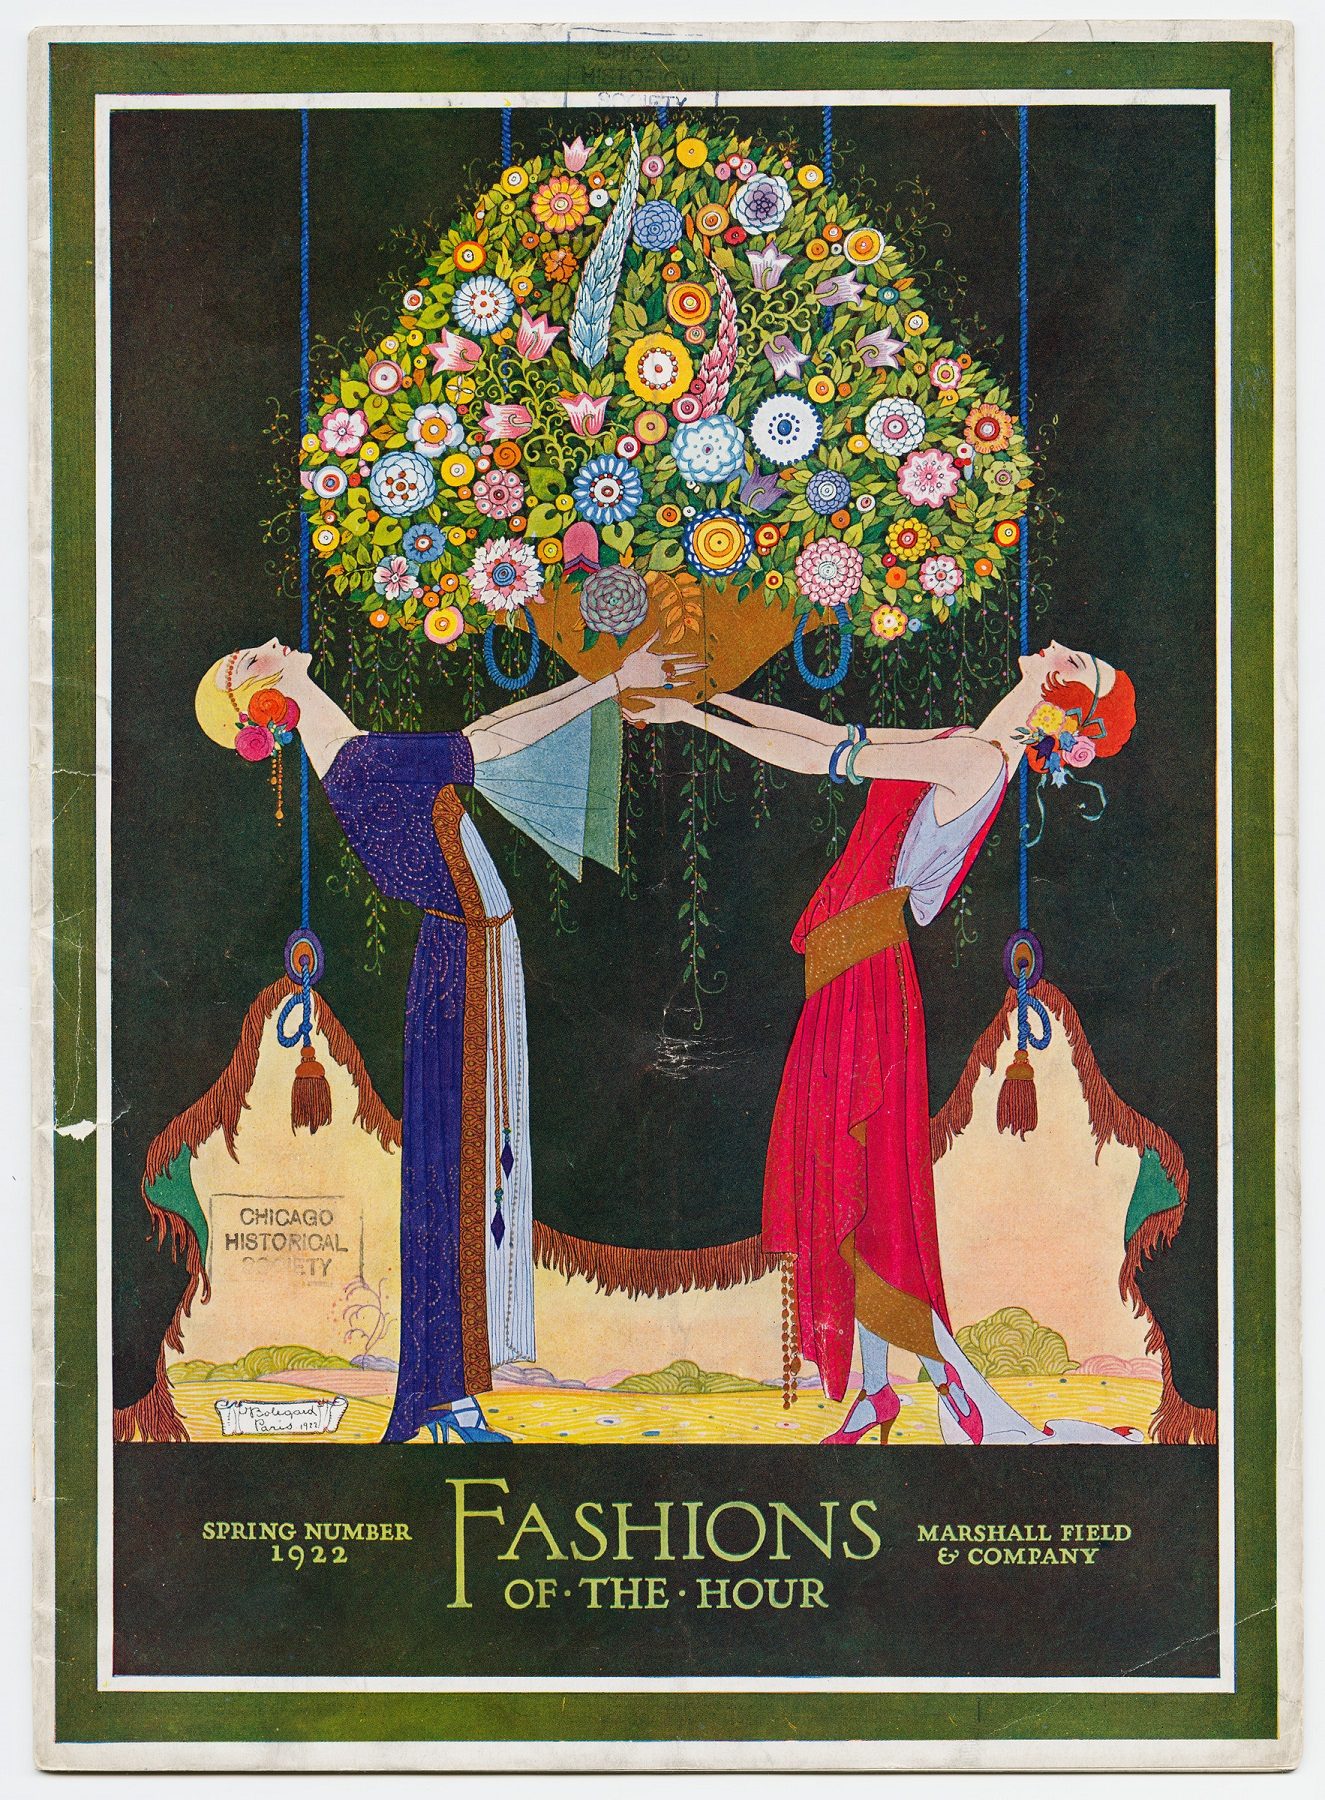 Marshall Field &amp; Company's Fashions of the Hour -Spring Number 1922 magazine cover, Chicago, Illinois, 1922.